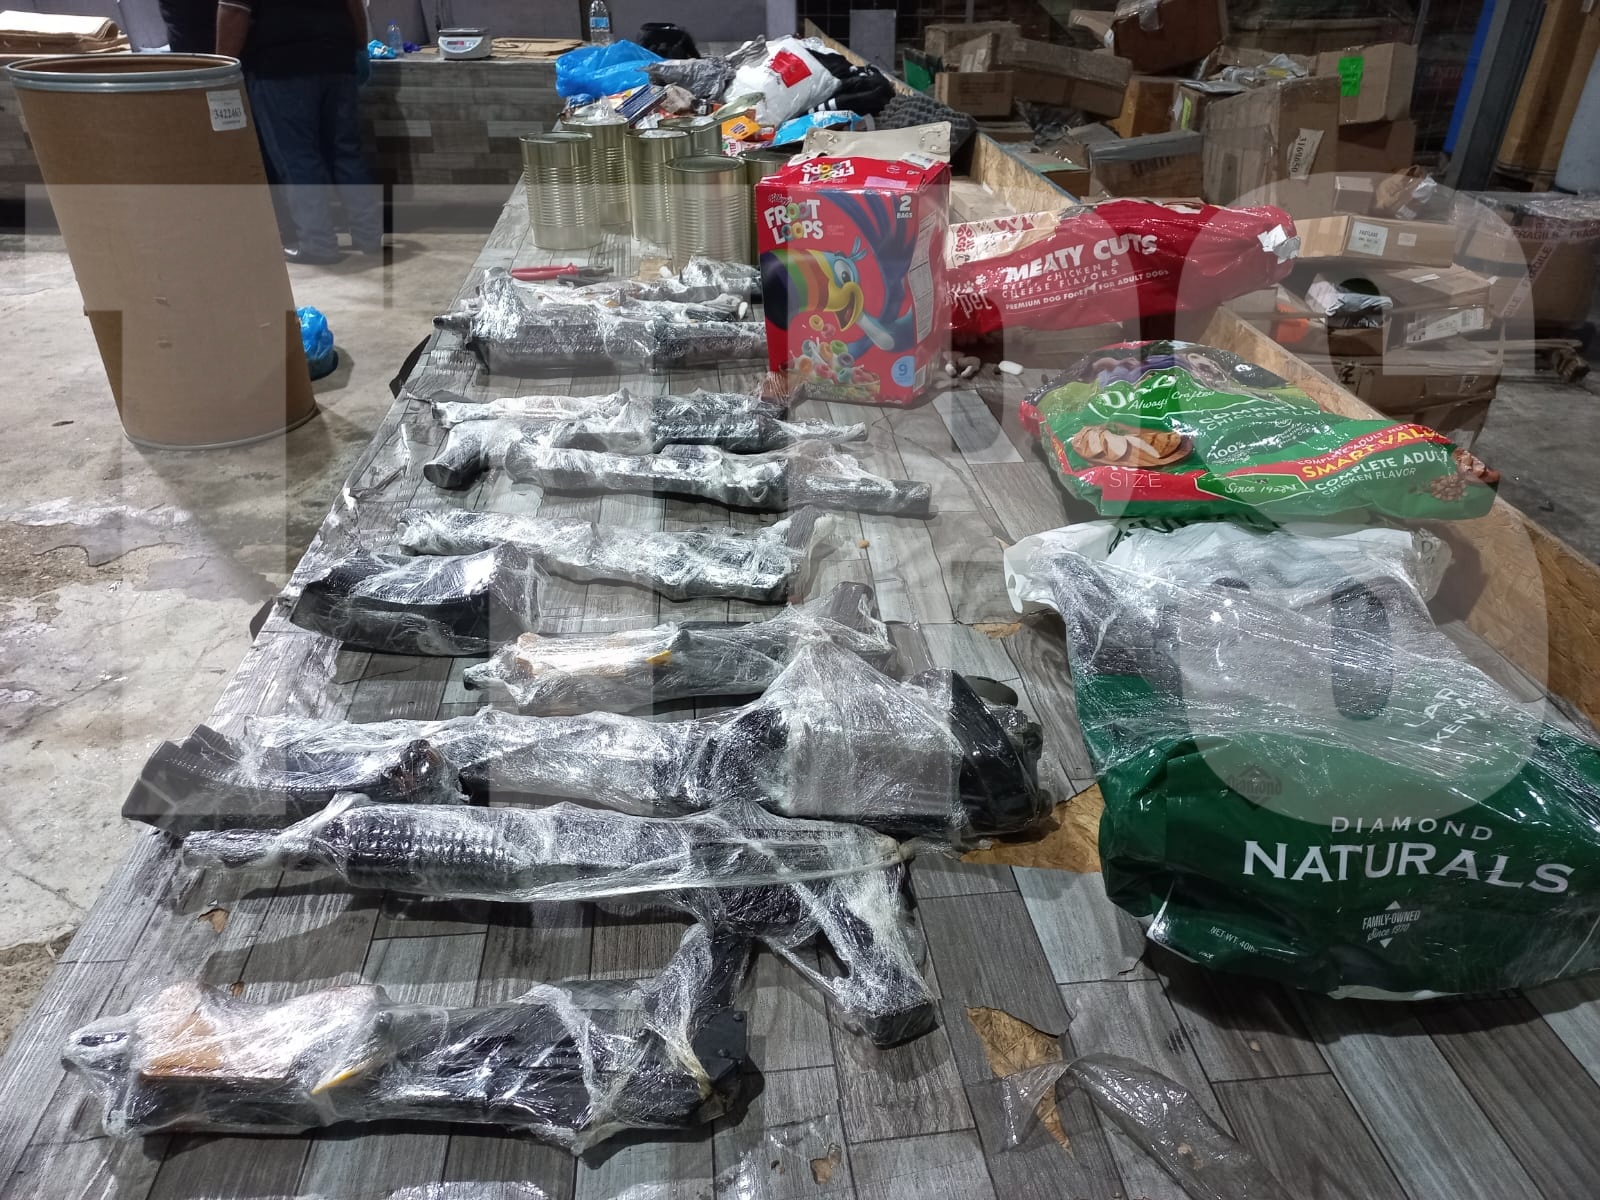 Police seize high powered weapons, ammo and $2.6M in weed at Central Bon